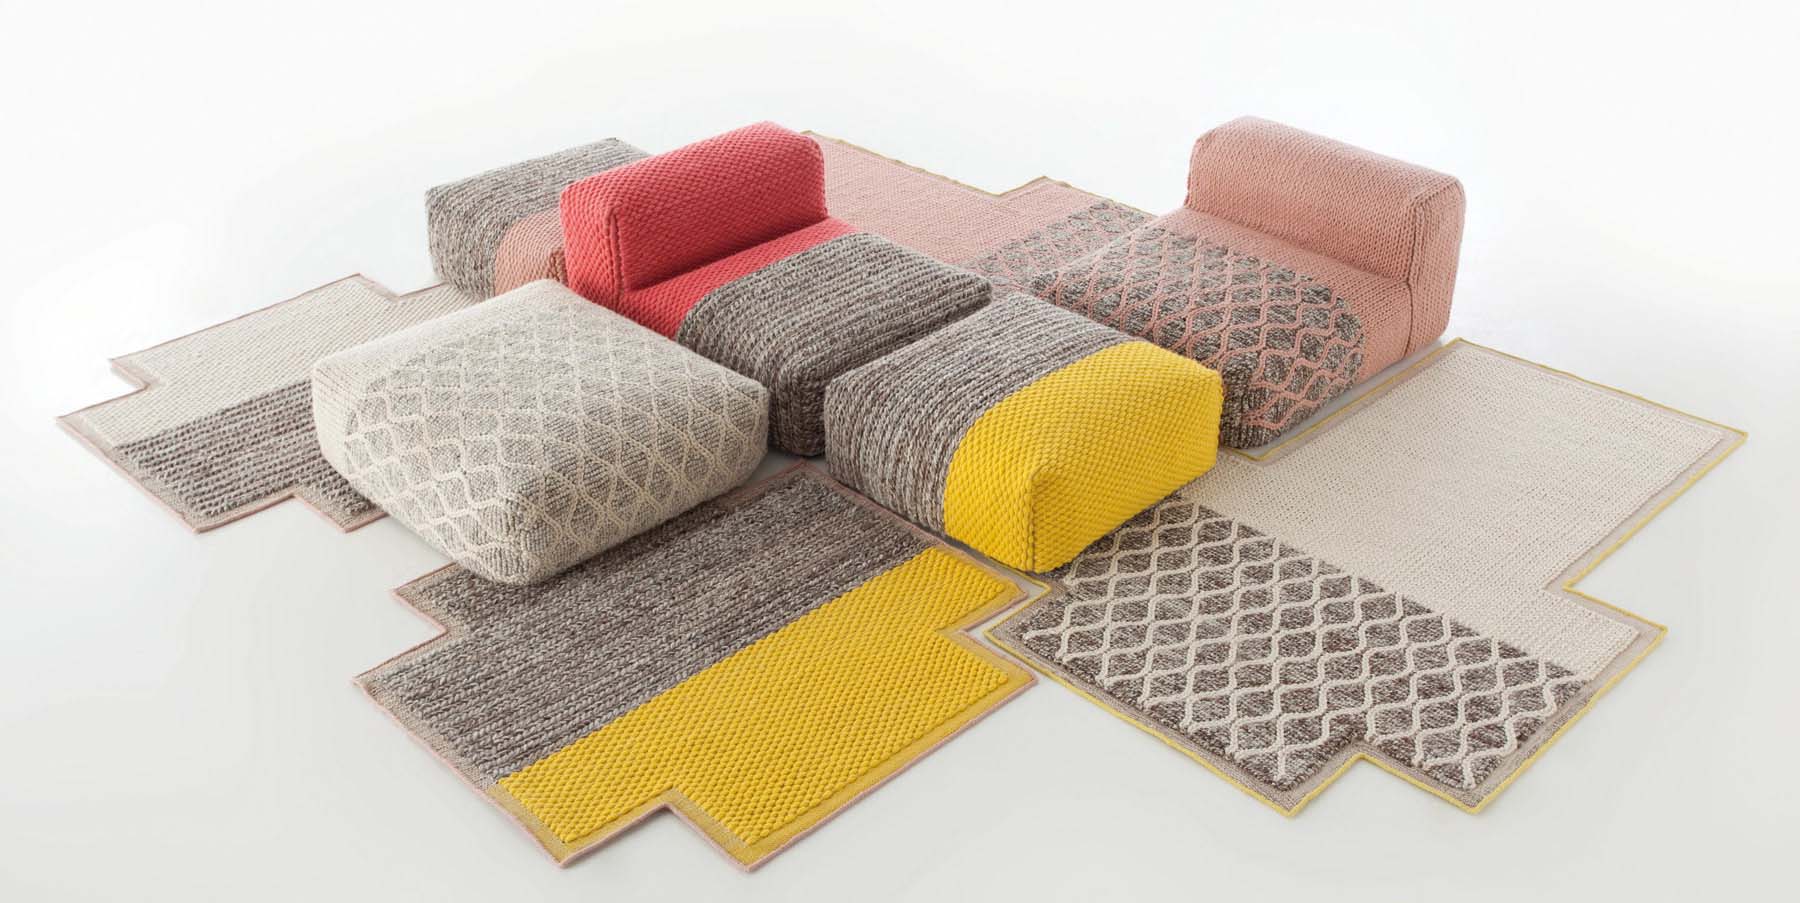 Gan mangas space collection by Patricia Urquiola